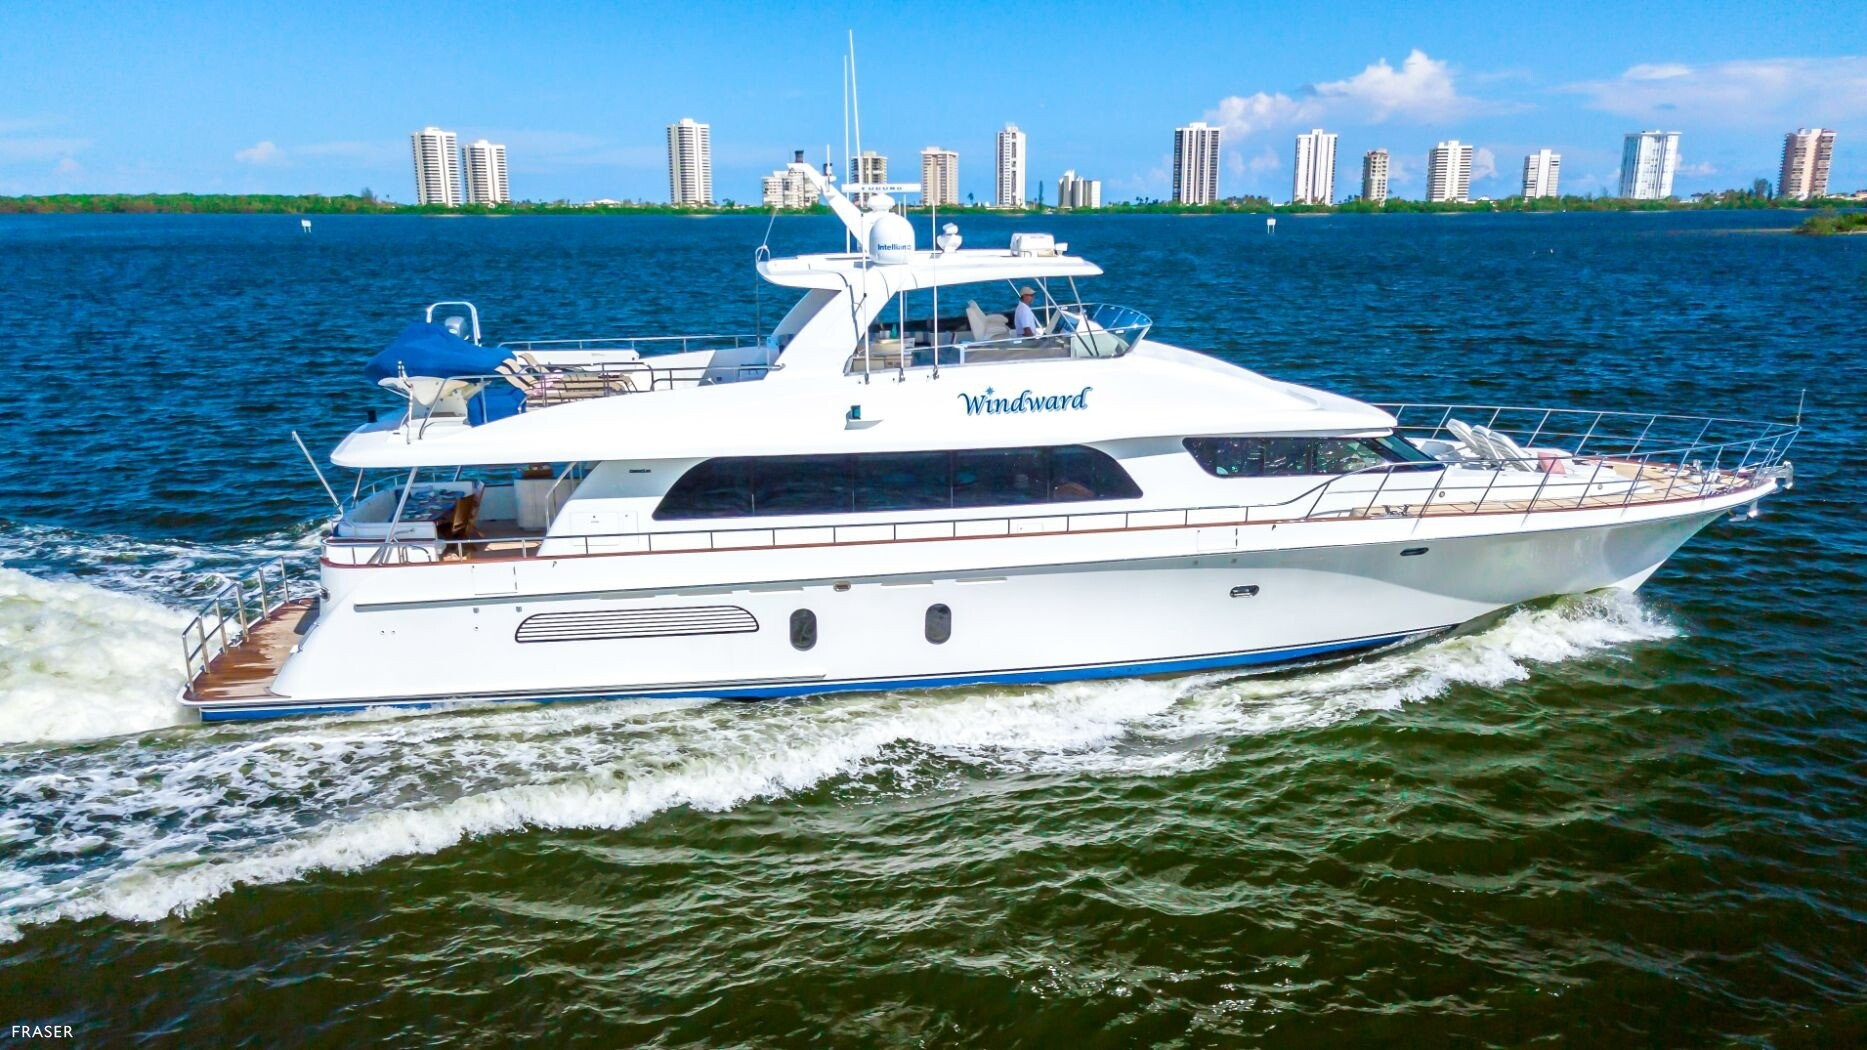 WINDWARD motor yacht for sale by FRASER, built by Cheoy Lee